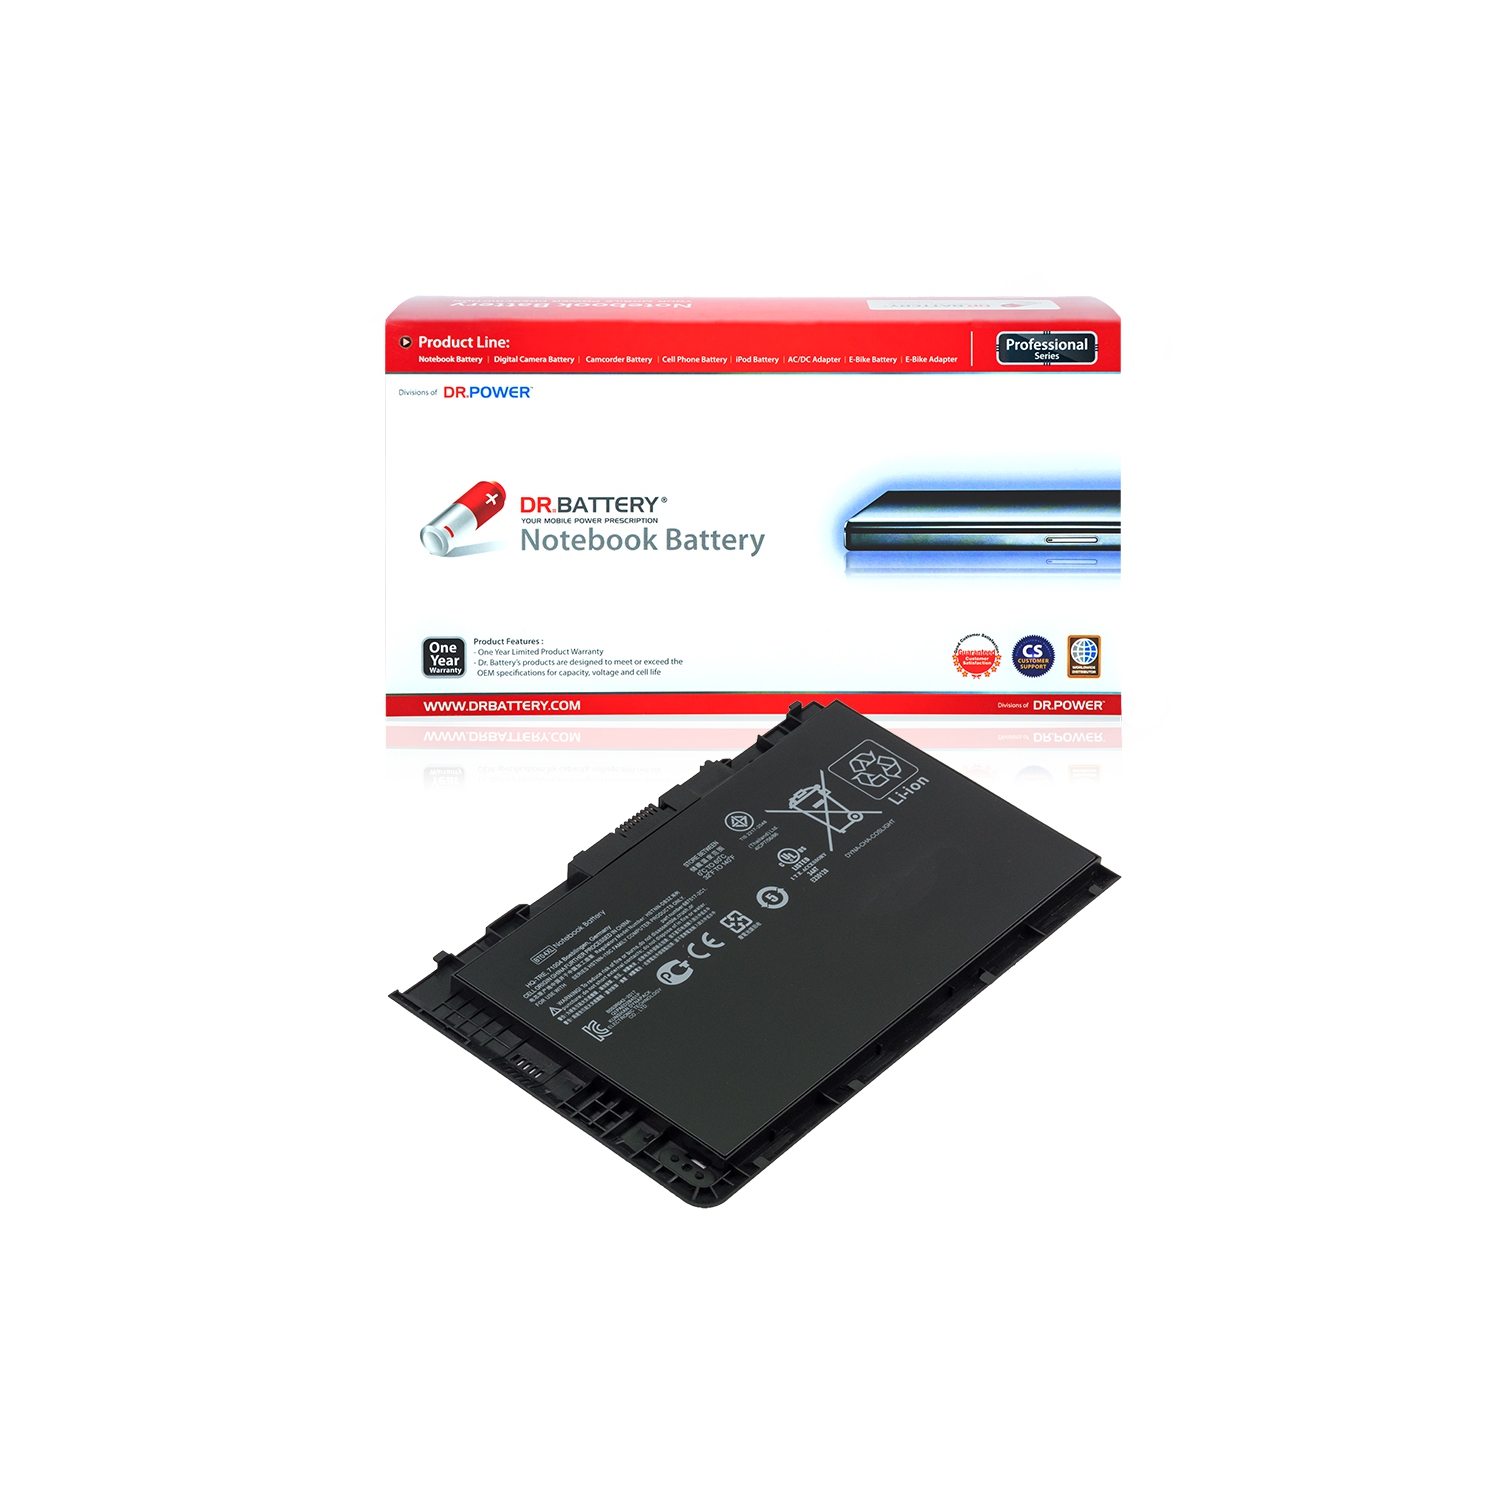 DR. BATTERY - Replacement for HP EliteBook Folio 9470m E1Y36UT / 9470m E1Y62UA / 9470m E1Y62UT / BA06 / BA06XL / BT04